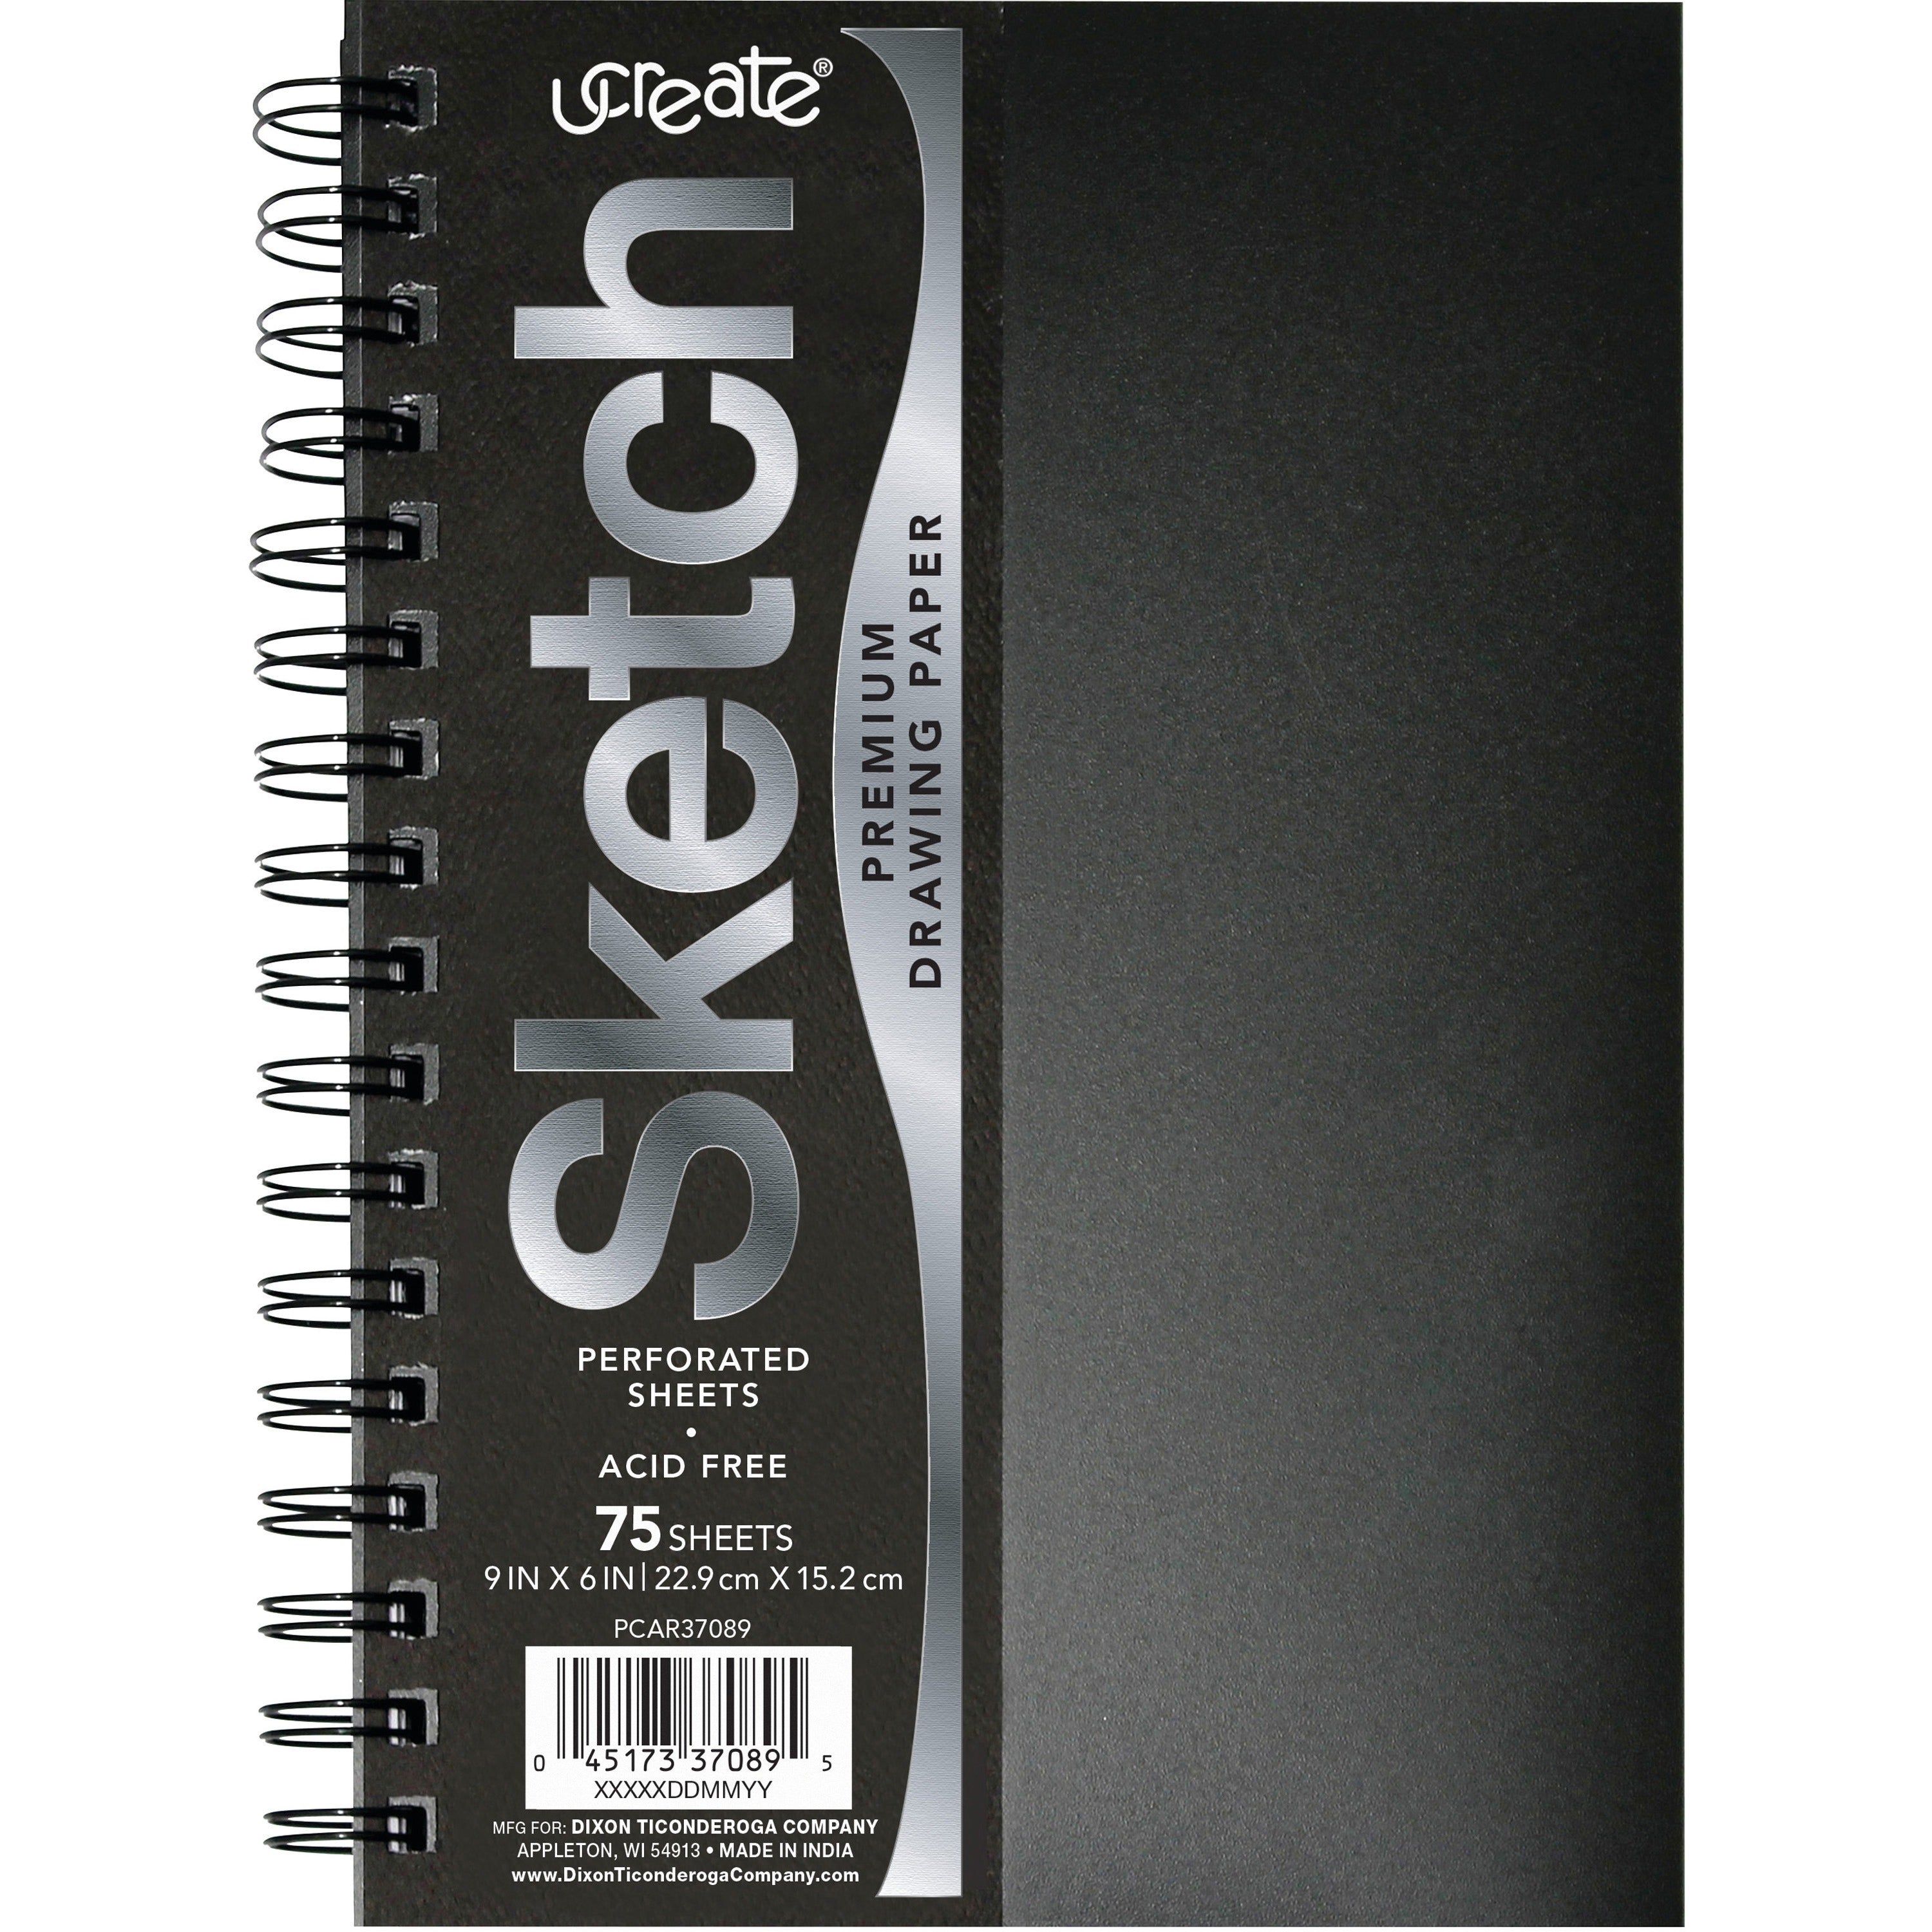 ucreate-poly-cover-sketch-book-75-sheets-spiral-70-lb-basis-weight-9-x-6-blackpolyurethane-cover-heavyweight-acid-free-paper-durable-cover-perforated-1-each_pacpcar37089 - 1